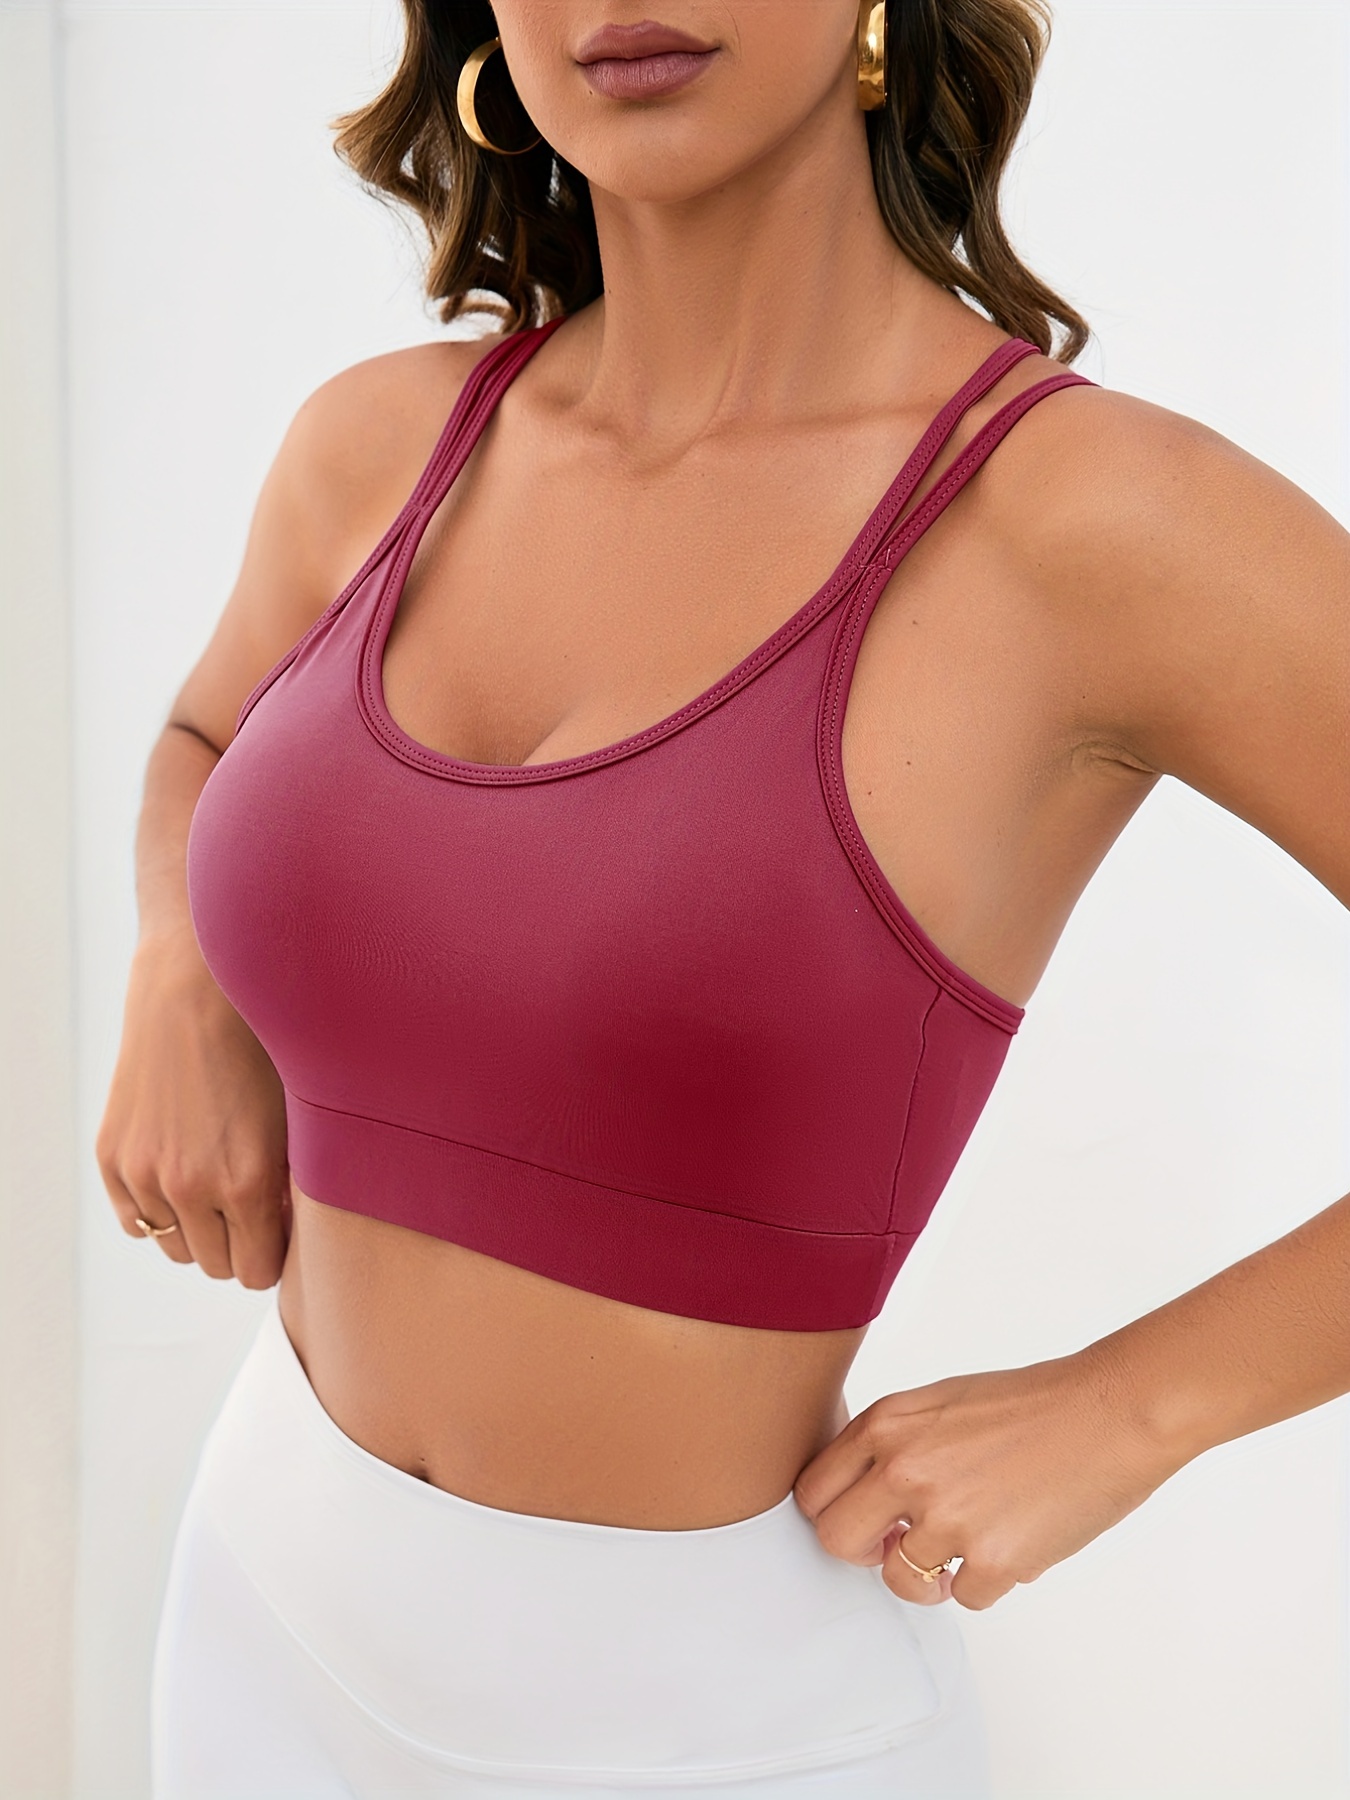 Burgundy Impact Sports Bra, Ideal for Yoga & Everyday Workout